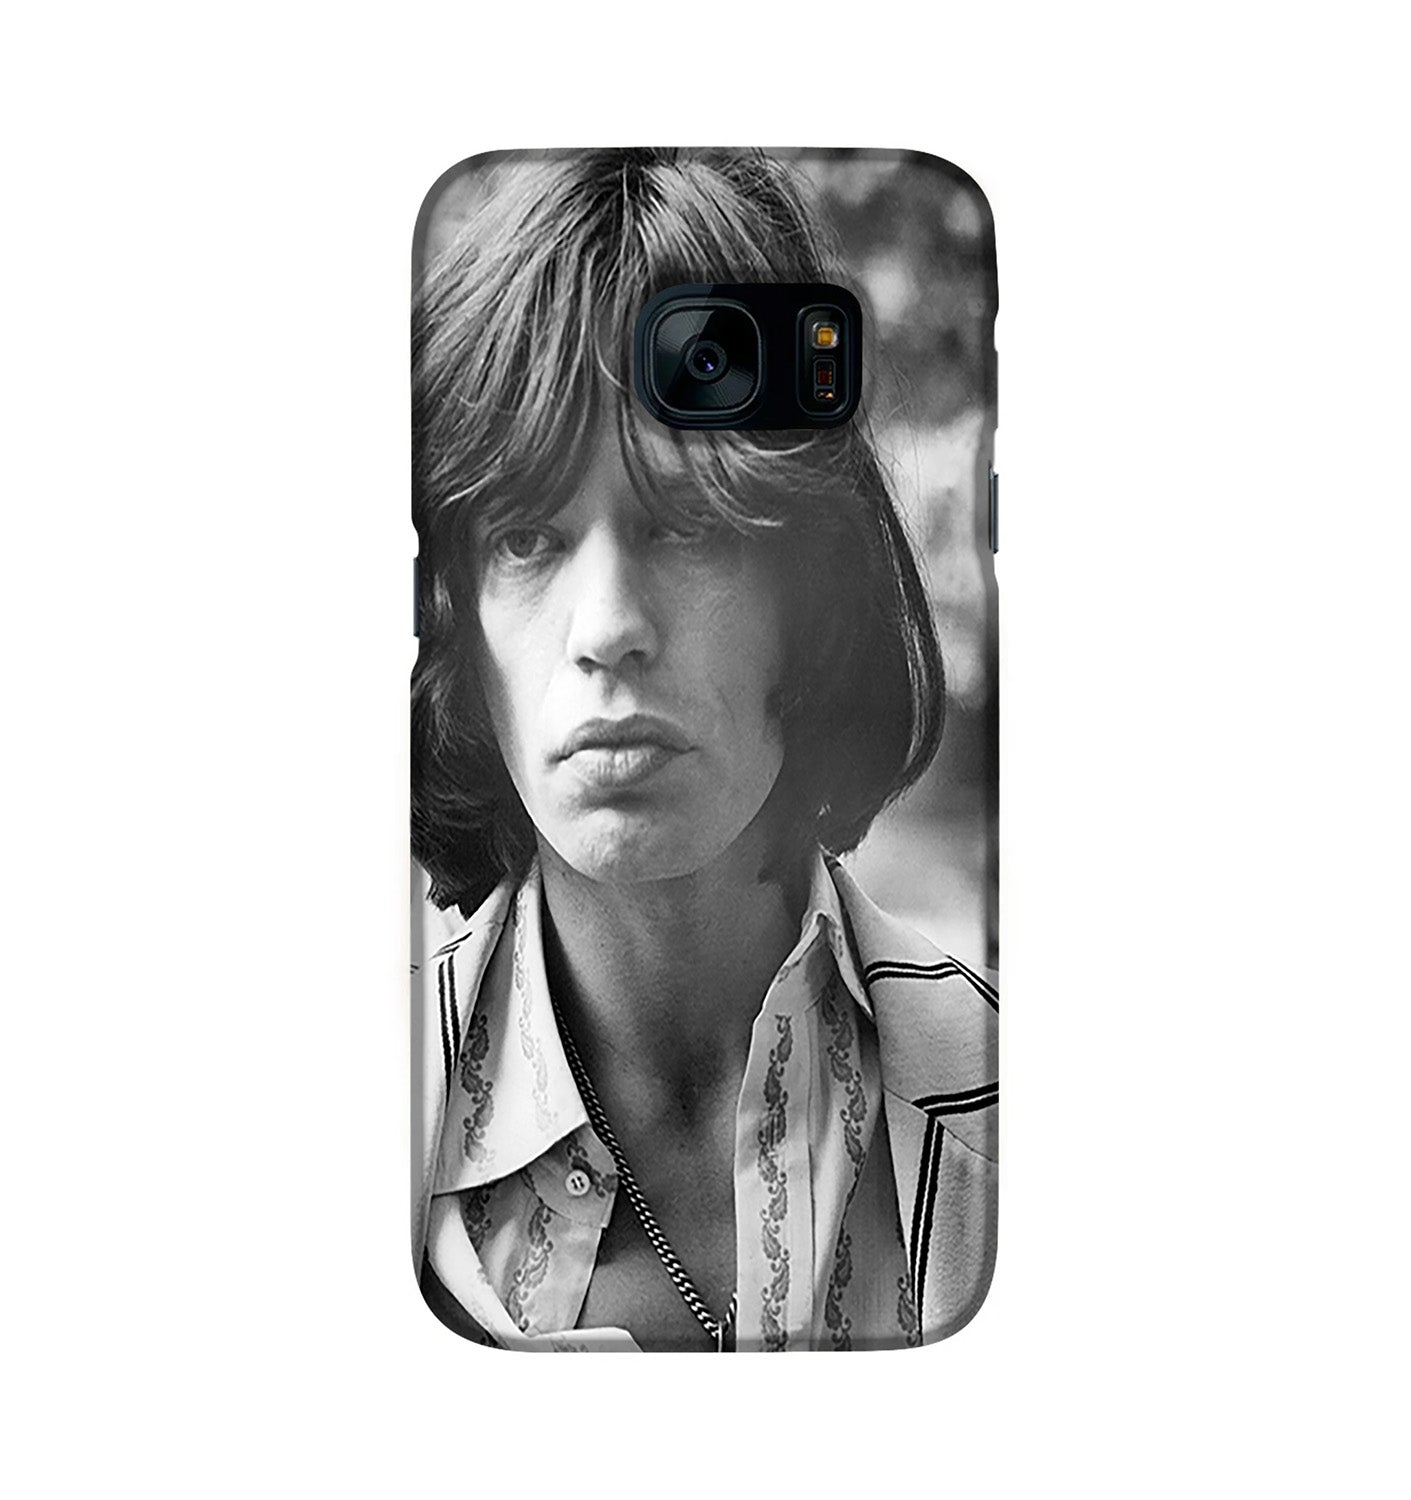 Mick Jagger in 1969 Phone Case Samsung S7